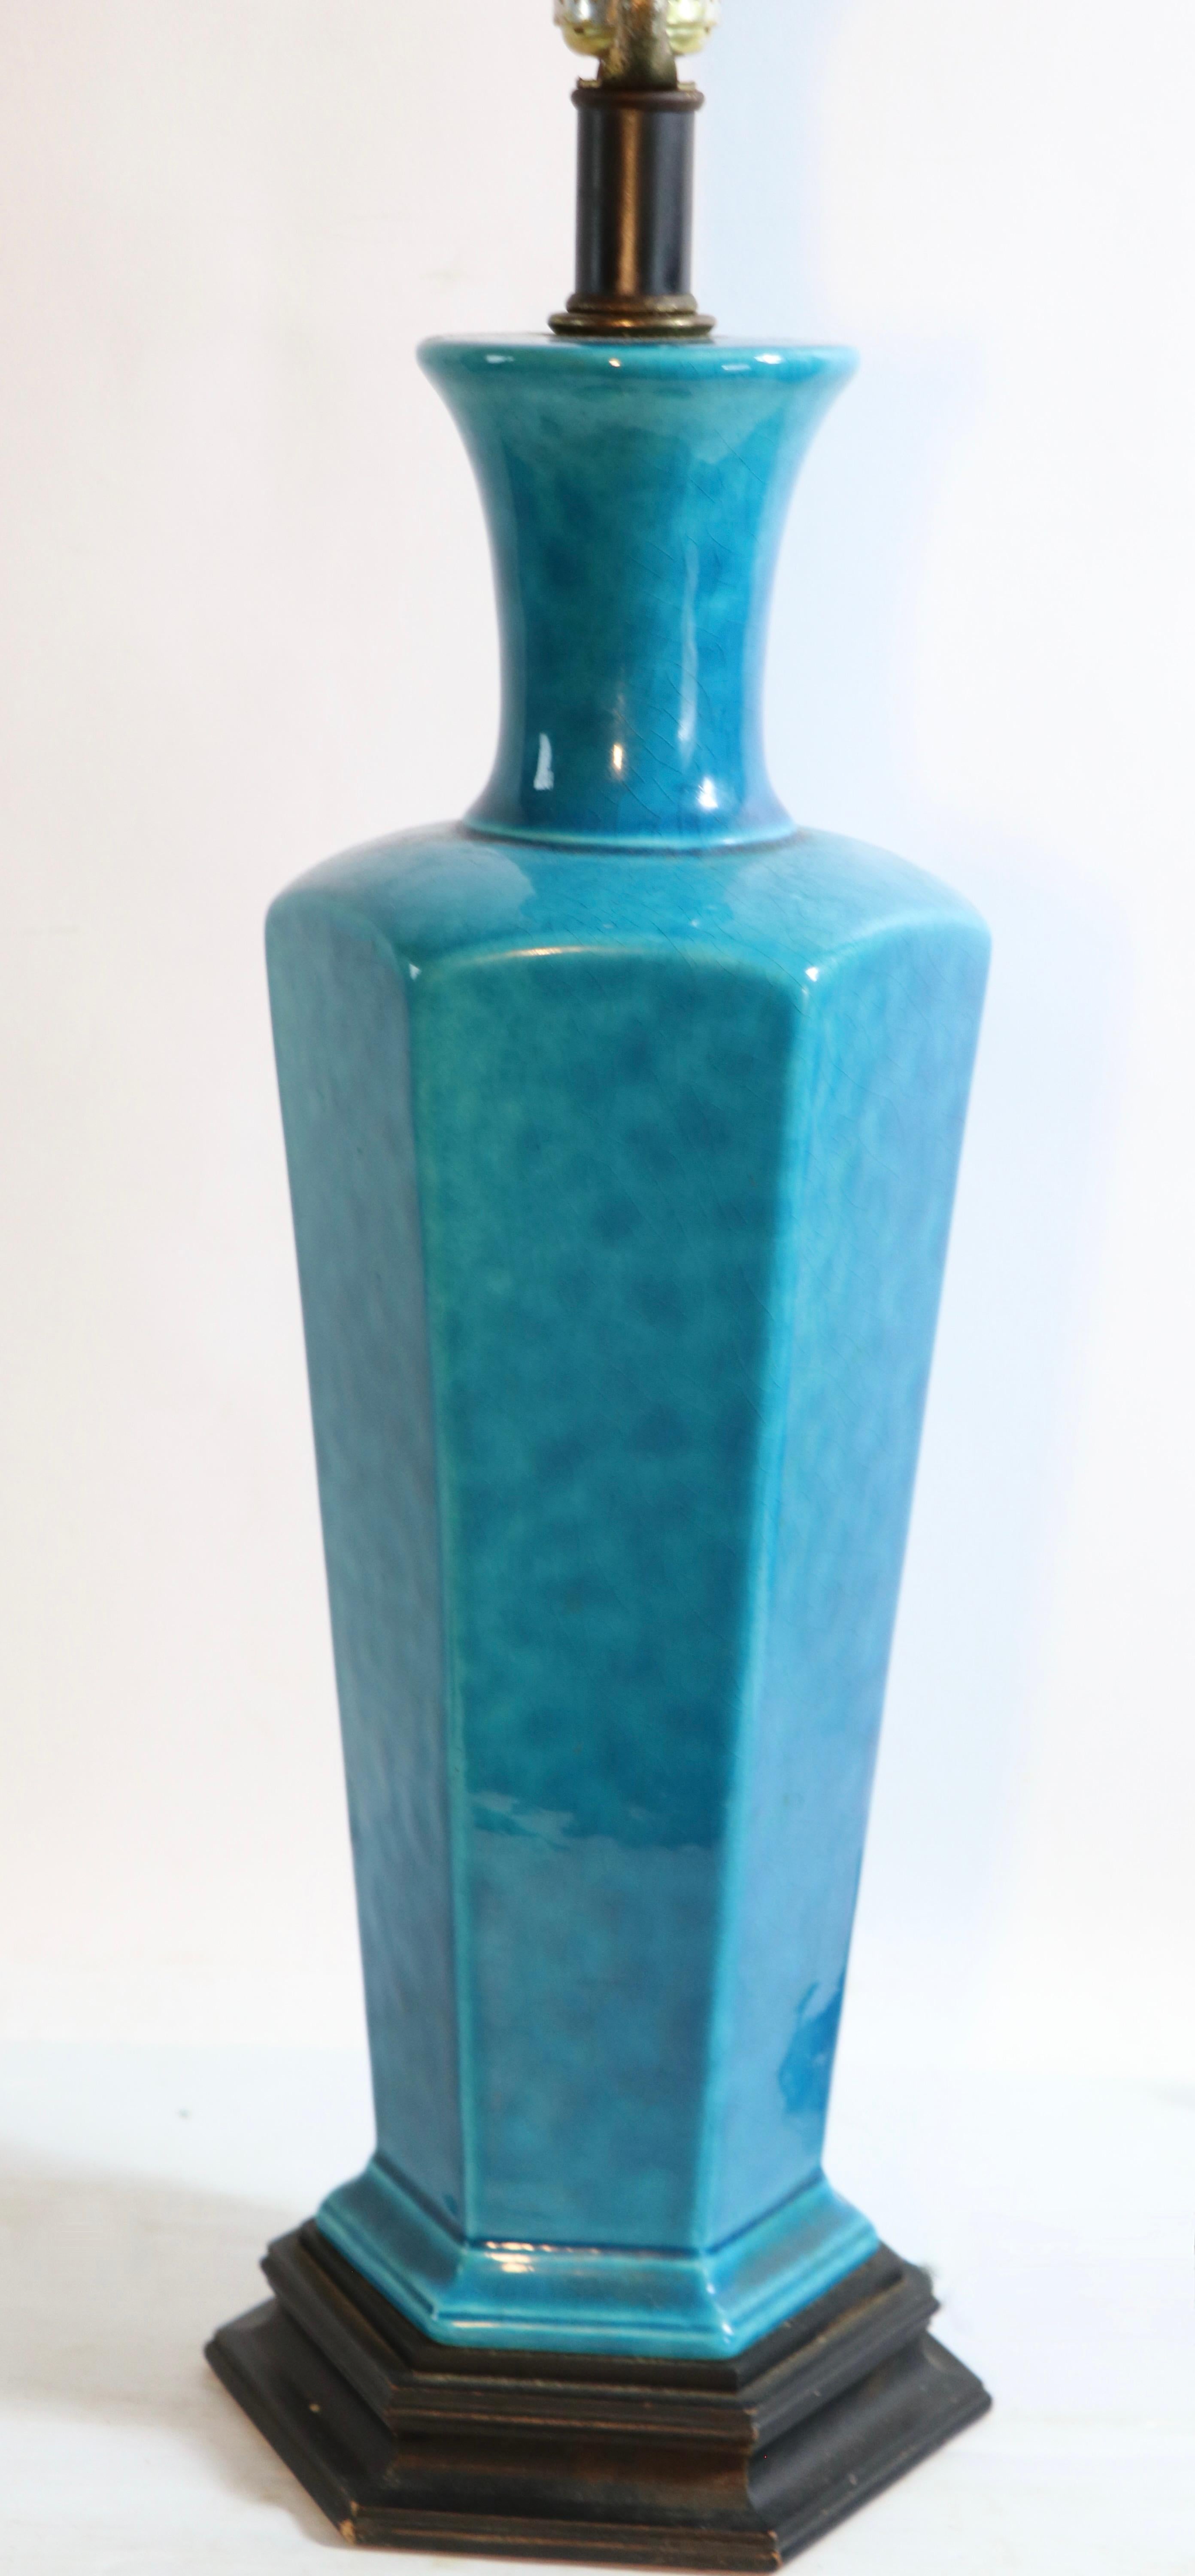 American Asia Modern Chinese Style Table Lamp in Blue Craquelure Glaze Finish